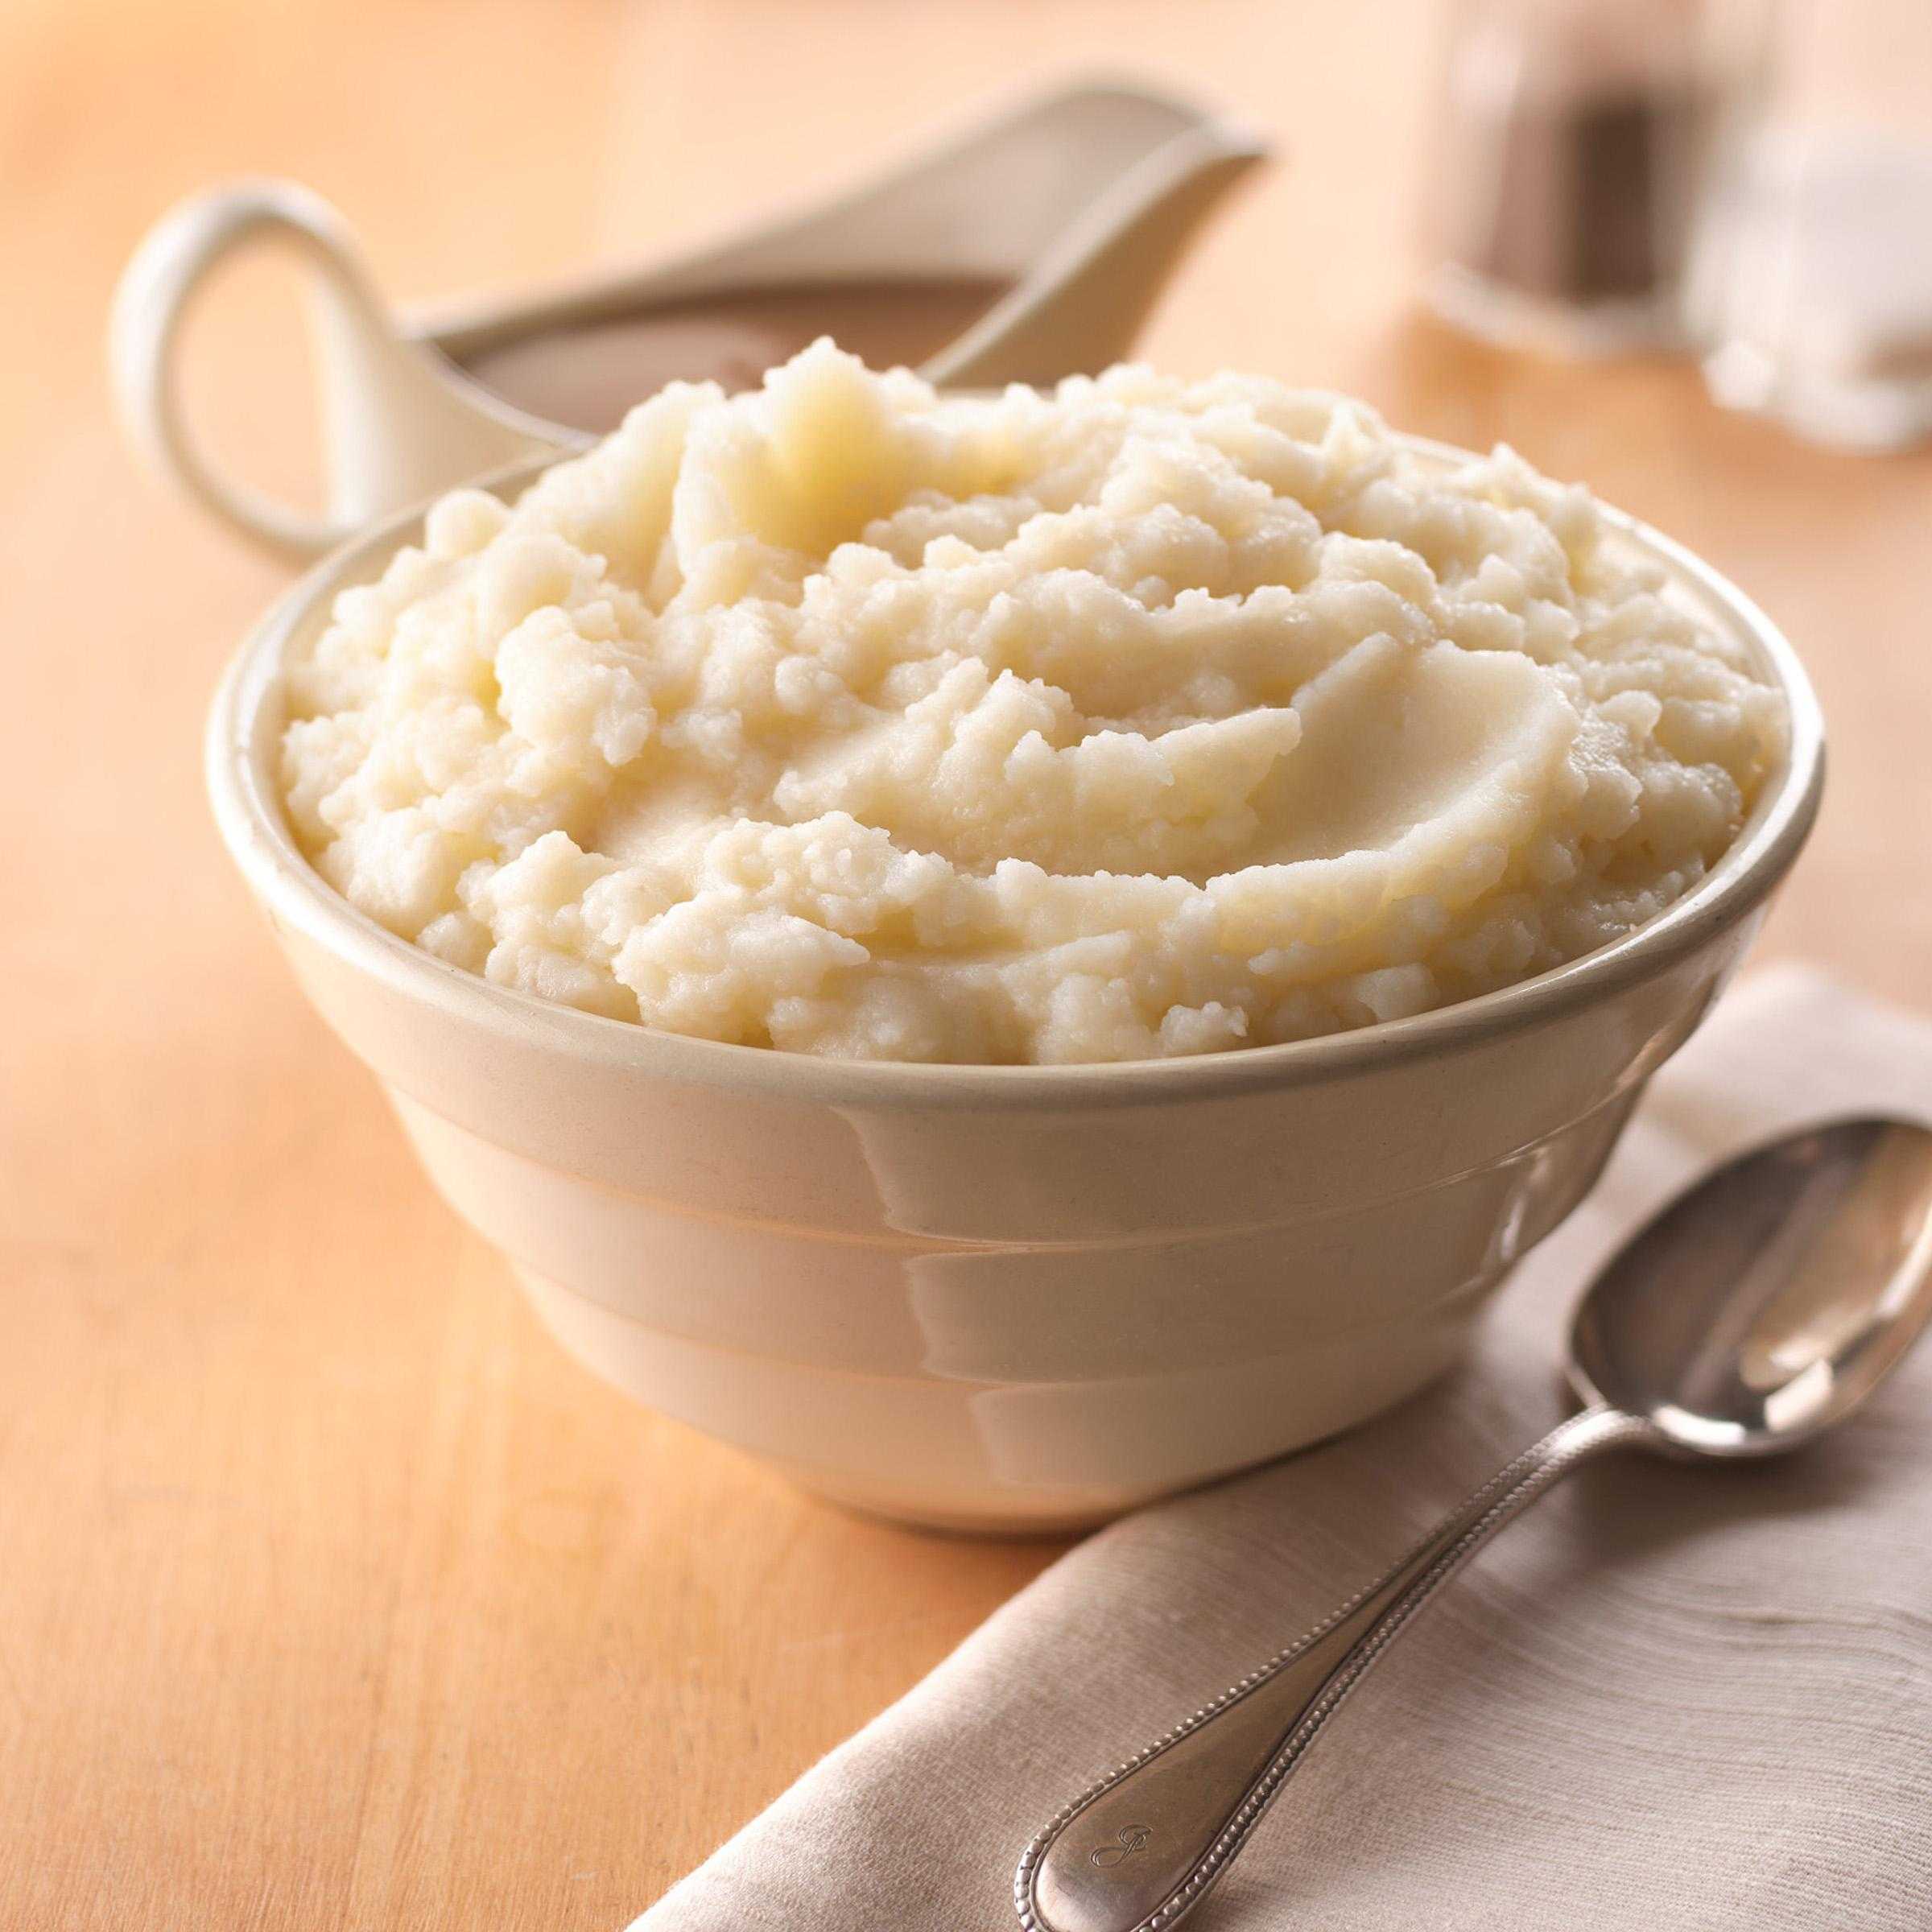 SImply Potatoes, Refrigerated Low Sodium Mashed Potatoes, Peeled Russet Potatoes, 4/6 Lb Bags